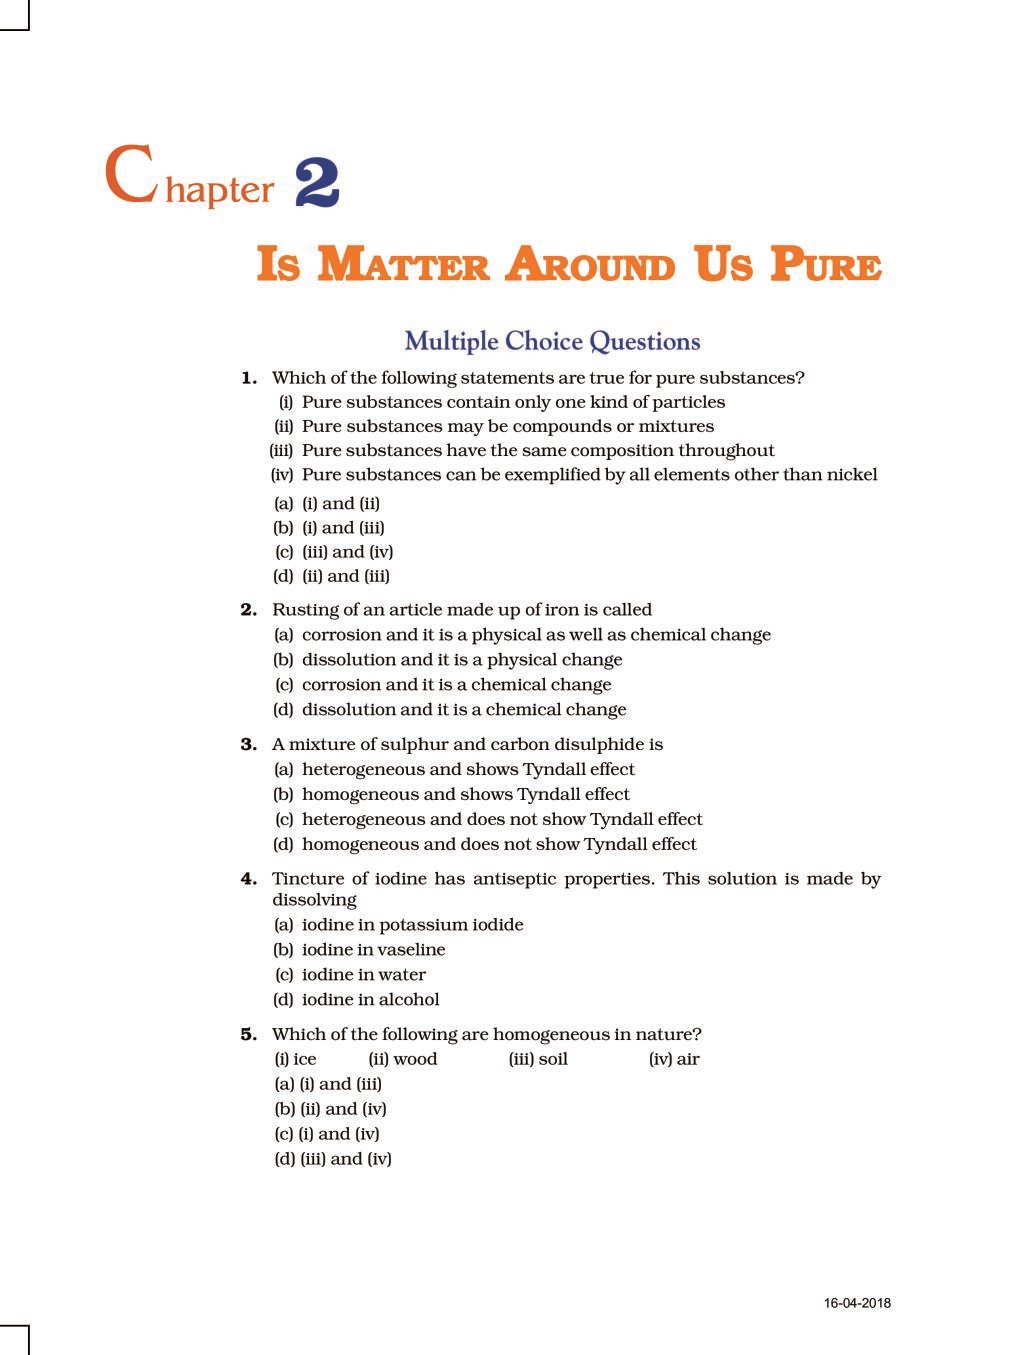 NCERT Exemplar Class 09 Science Unit 2 Is Matter Around Us Pure - Page 1